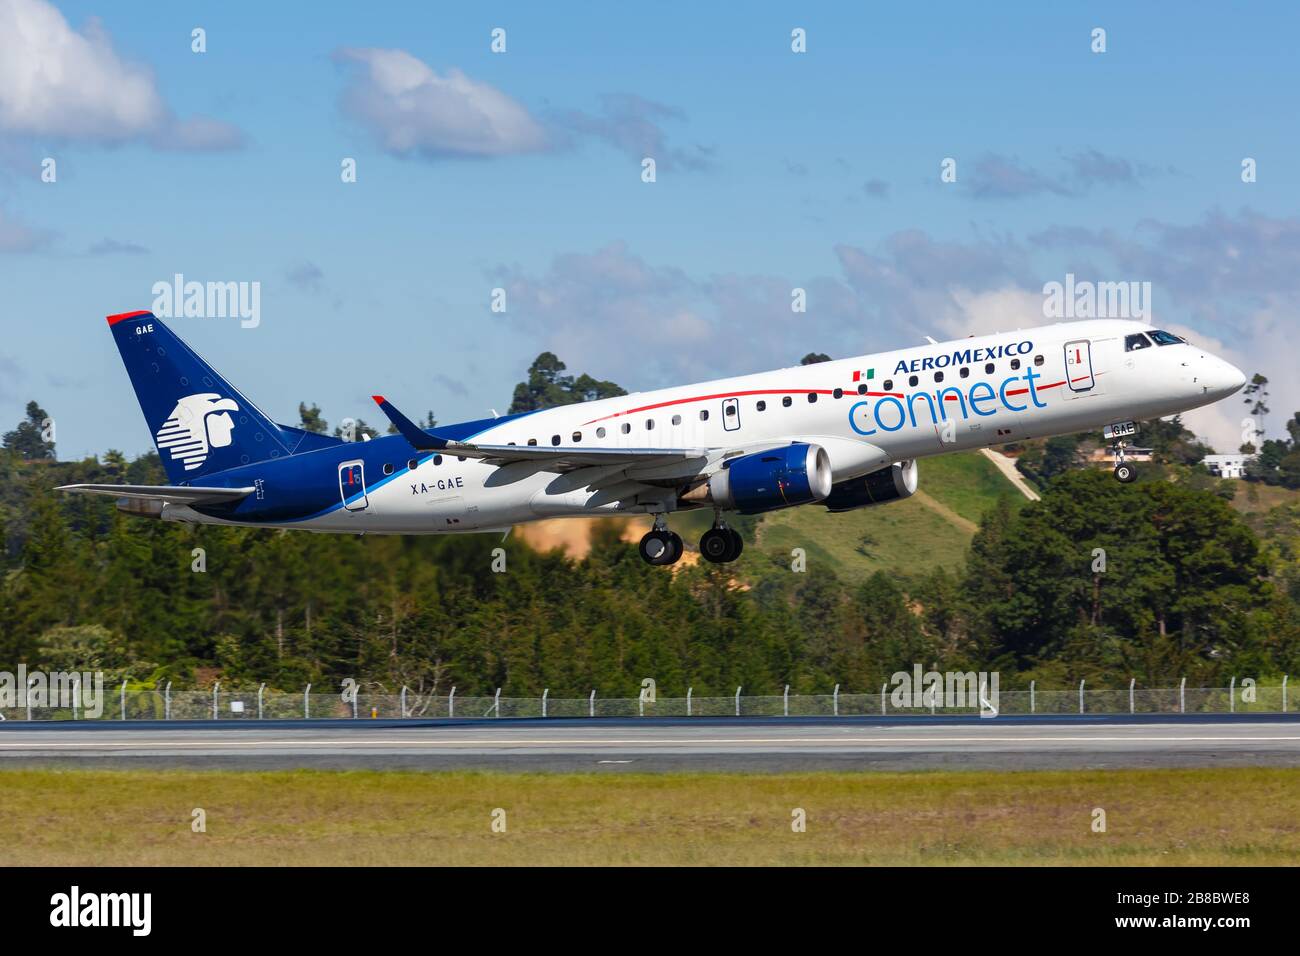 Medellin Colombia January 26 2019 Aeromexico Connect Embraer